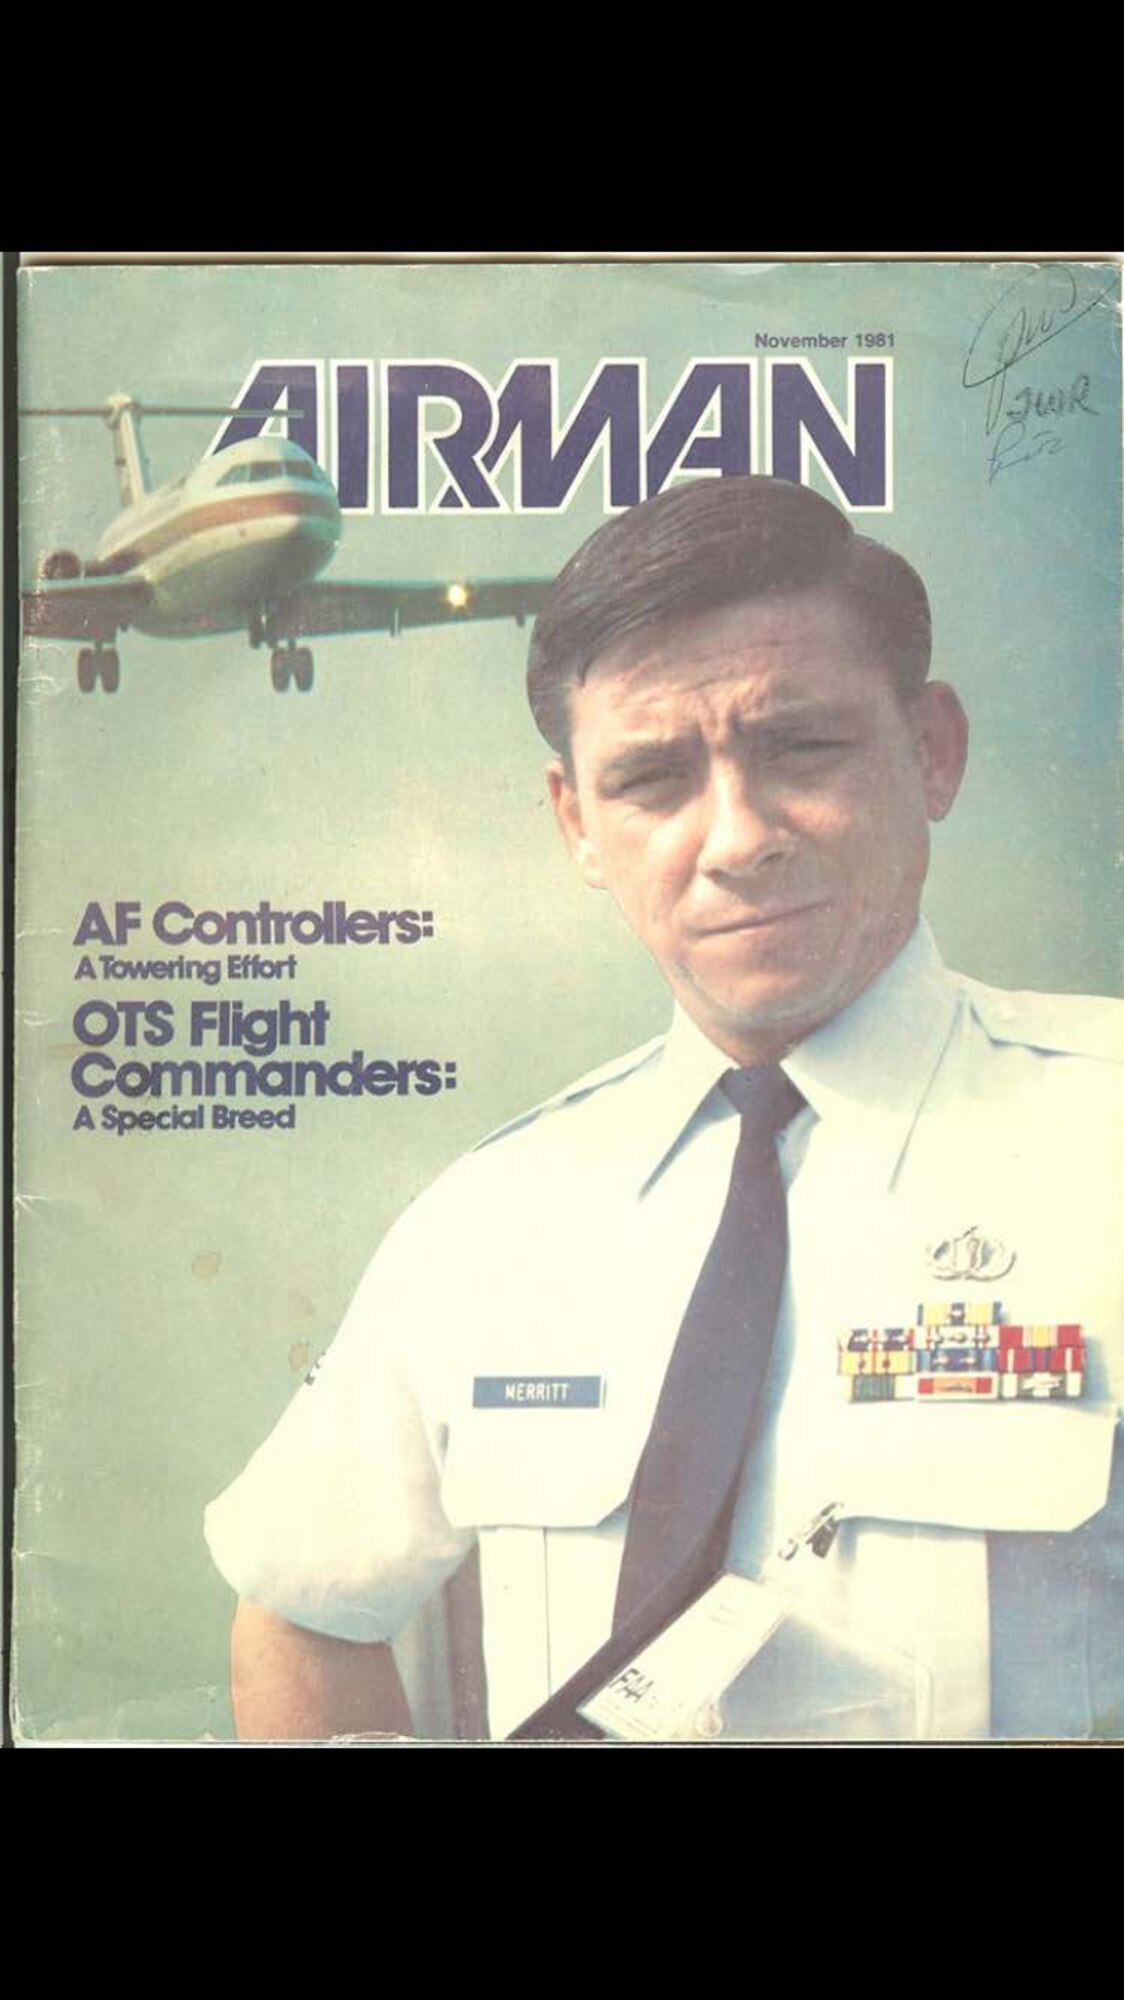 William Merritt, a retired Air Force master sergeant, is featured on a past cover of Airman Magazine. He is the father of Michael Merritt, 325th Operation Support Squadron radar approach control chief controller, and the second of three generations of Air Traffic Controllers. (U.S. Air Force courtesy photo)